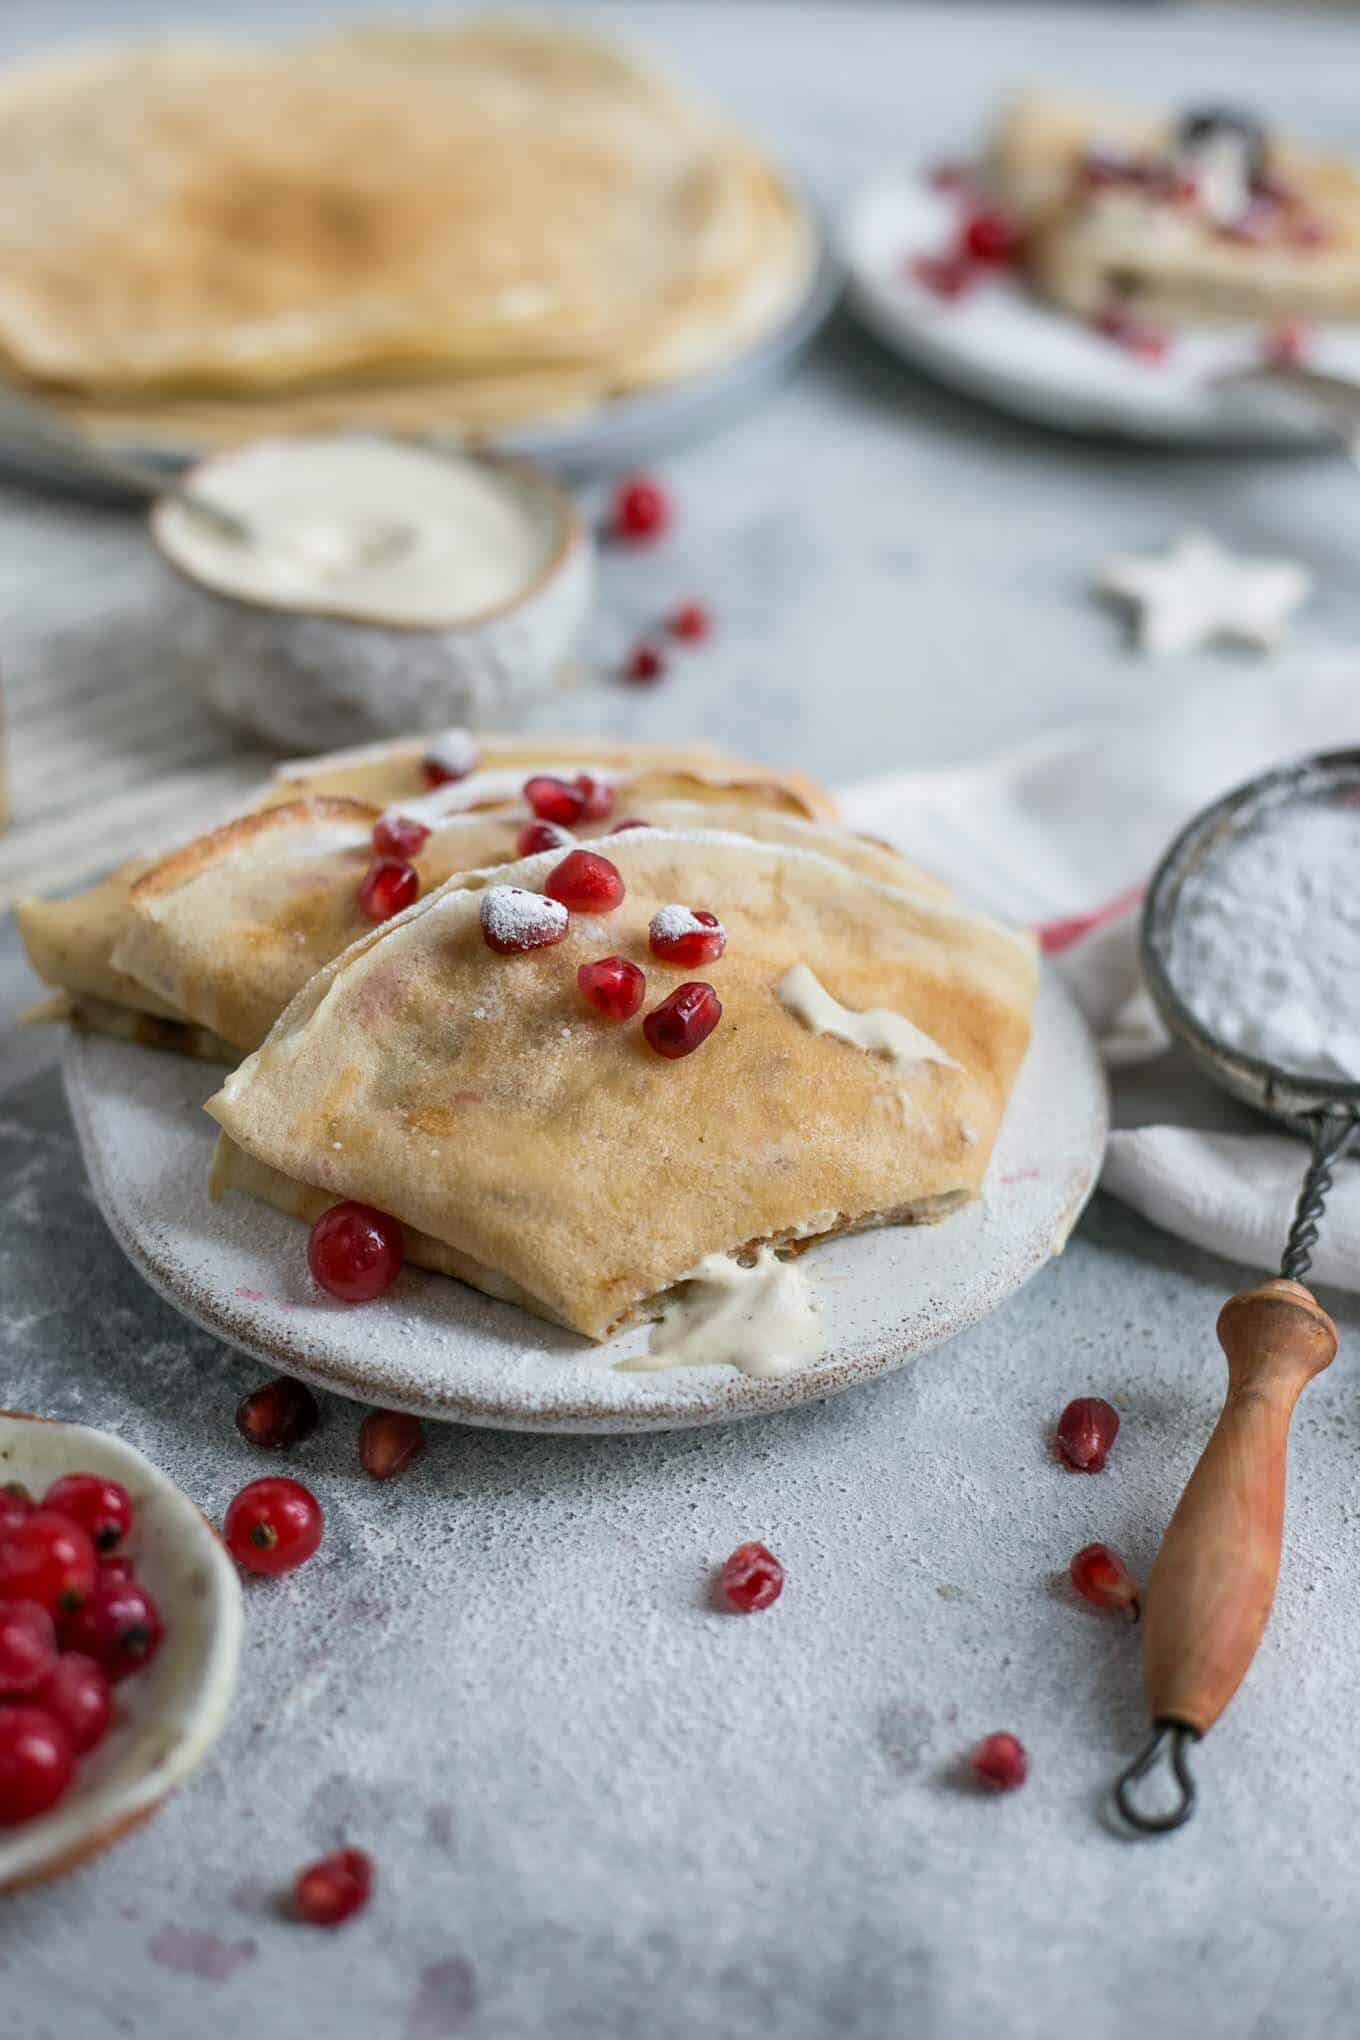 Delicious vegan french crepes, filled with vanilla cashew cream #vegan #crepes #brunch | via @annabanana.co